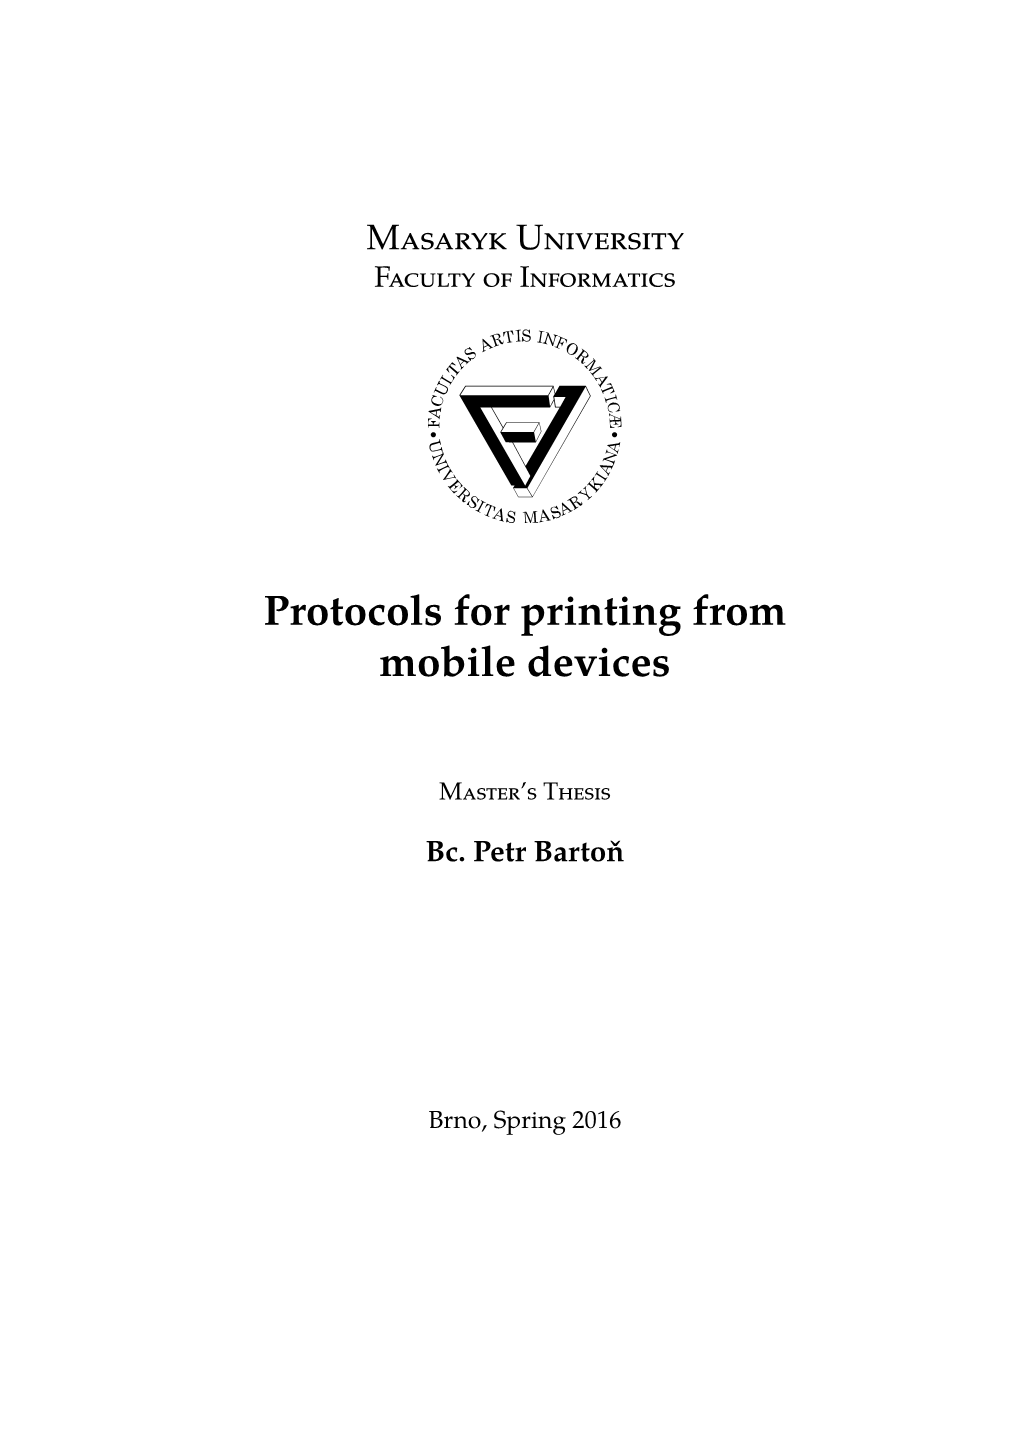 Protocols for Printing from Mobile Devices